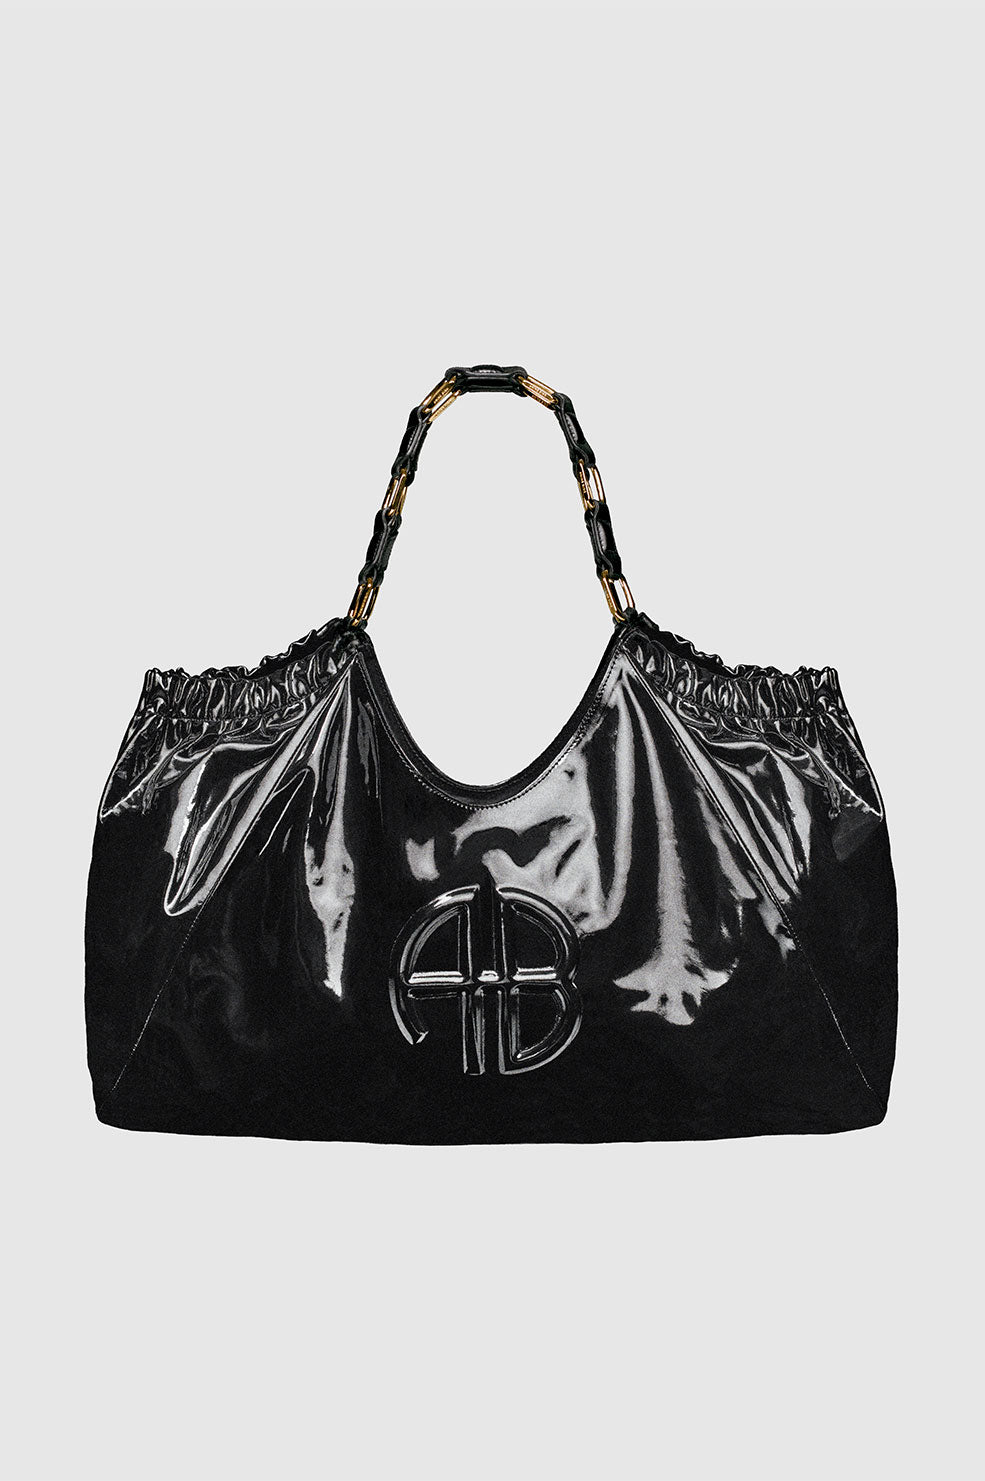 ANINE BING Kate Tote - High-Shine Black - Front View